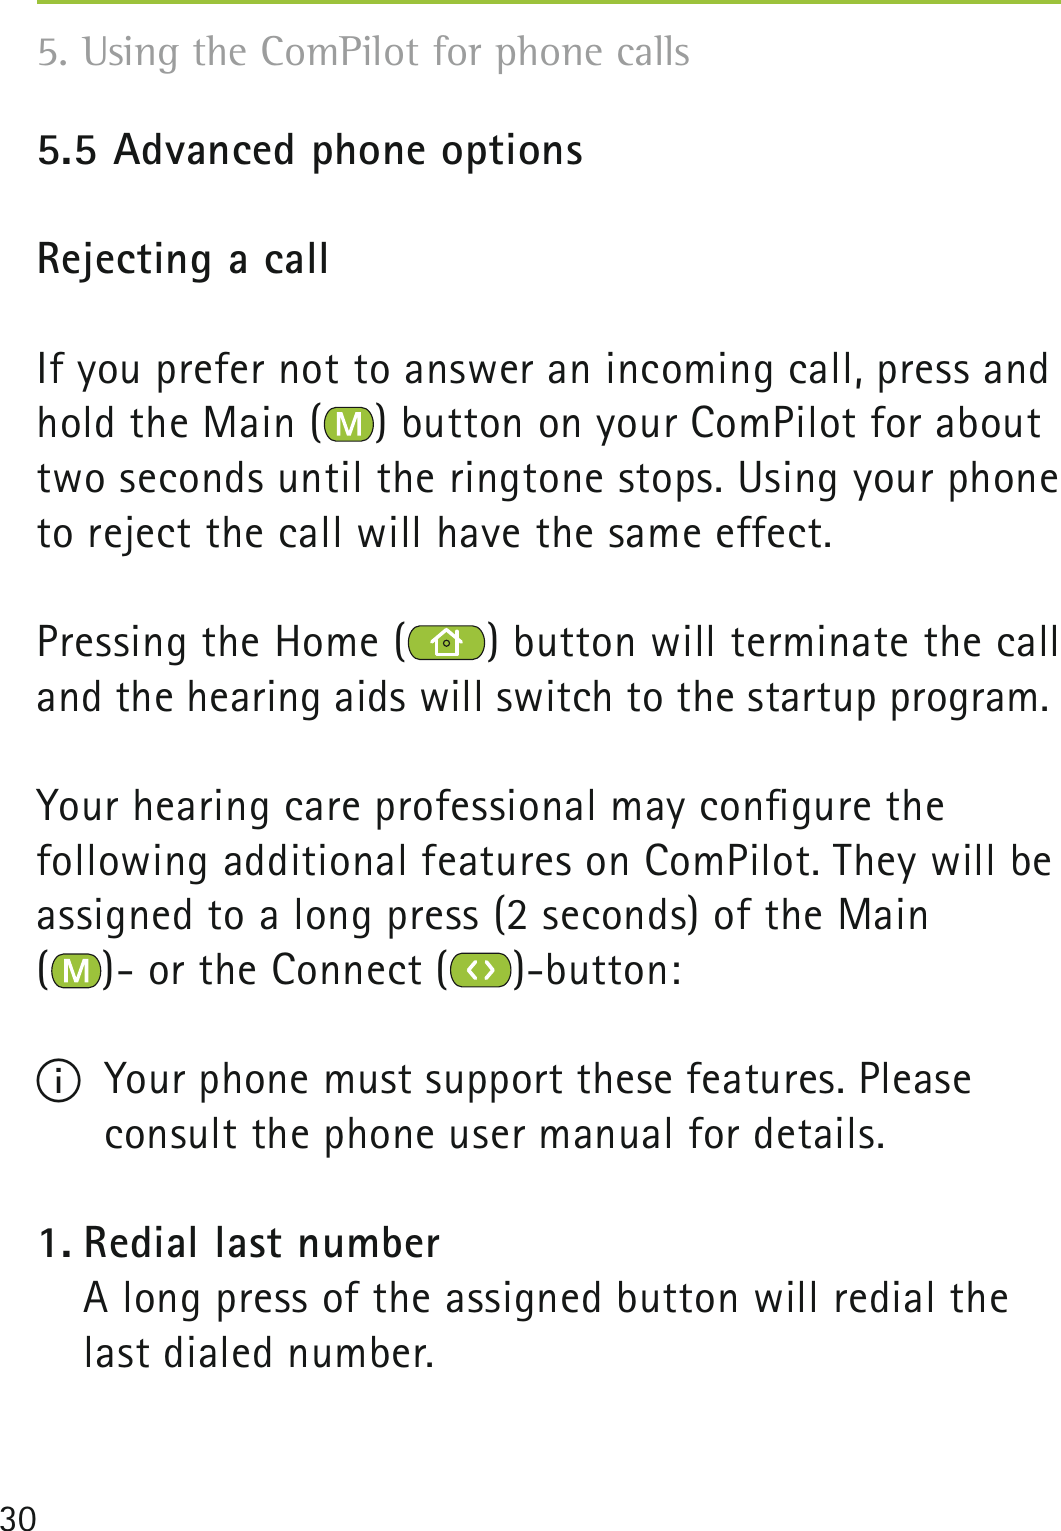 305.5 Advanced phone optionsRejecting a callIf you prefer not to answer an incoming call, press and hold the Main ( ) button on your ComPilot for about two seconds until the ringtone stops. Using your phone to reject the call will have the same effect.Pressing the Home ( ) button will terminate the call and the hearing aids will switch to the startup program.Your hearing care professional may conﬁgure the  following additional features on ComPilot. They will be assigned to a long press (2 seconds) of the Main  ()- or the Connect ( )-button: I  Your phone must support these features. Please consult the phone user manual for details.1. Redial last number    A long press of the assigned button will redial the last dialed number.5. Using the ComPilot for phone calls 